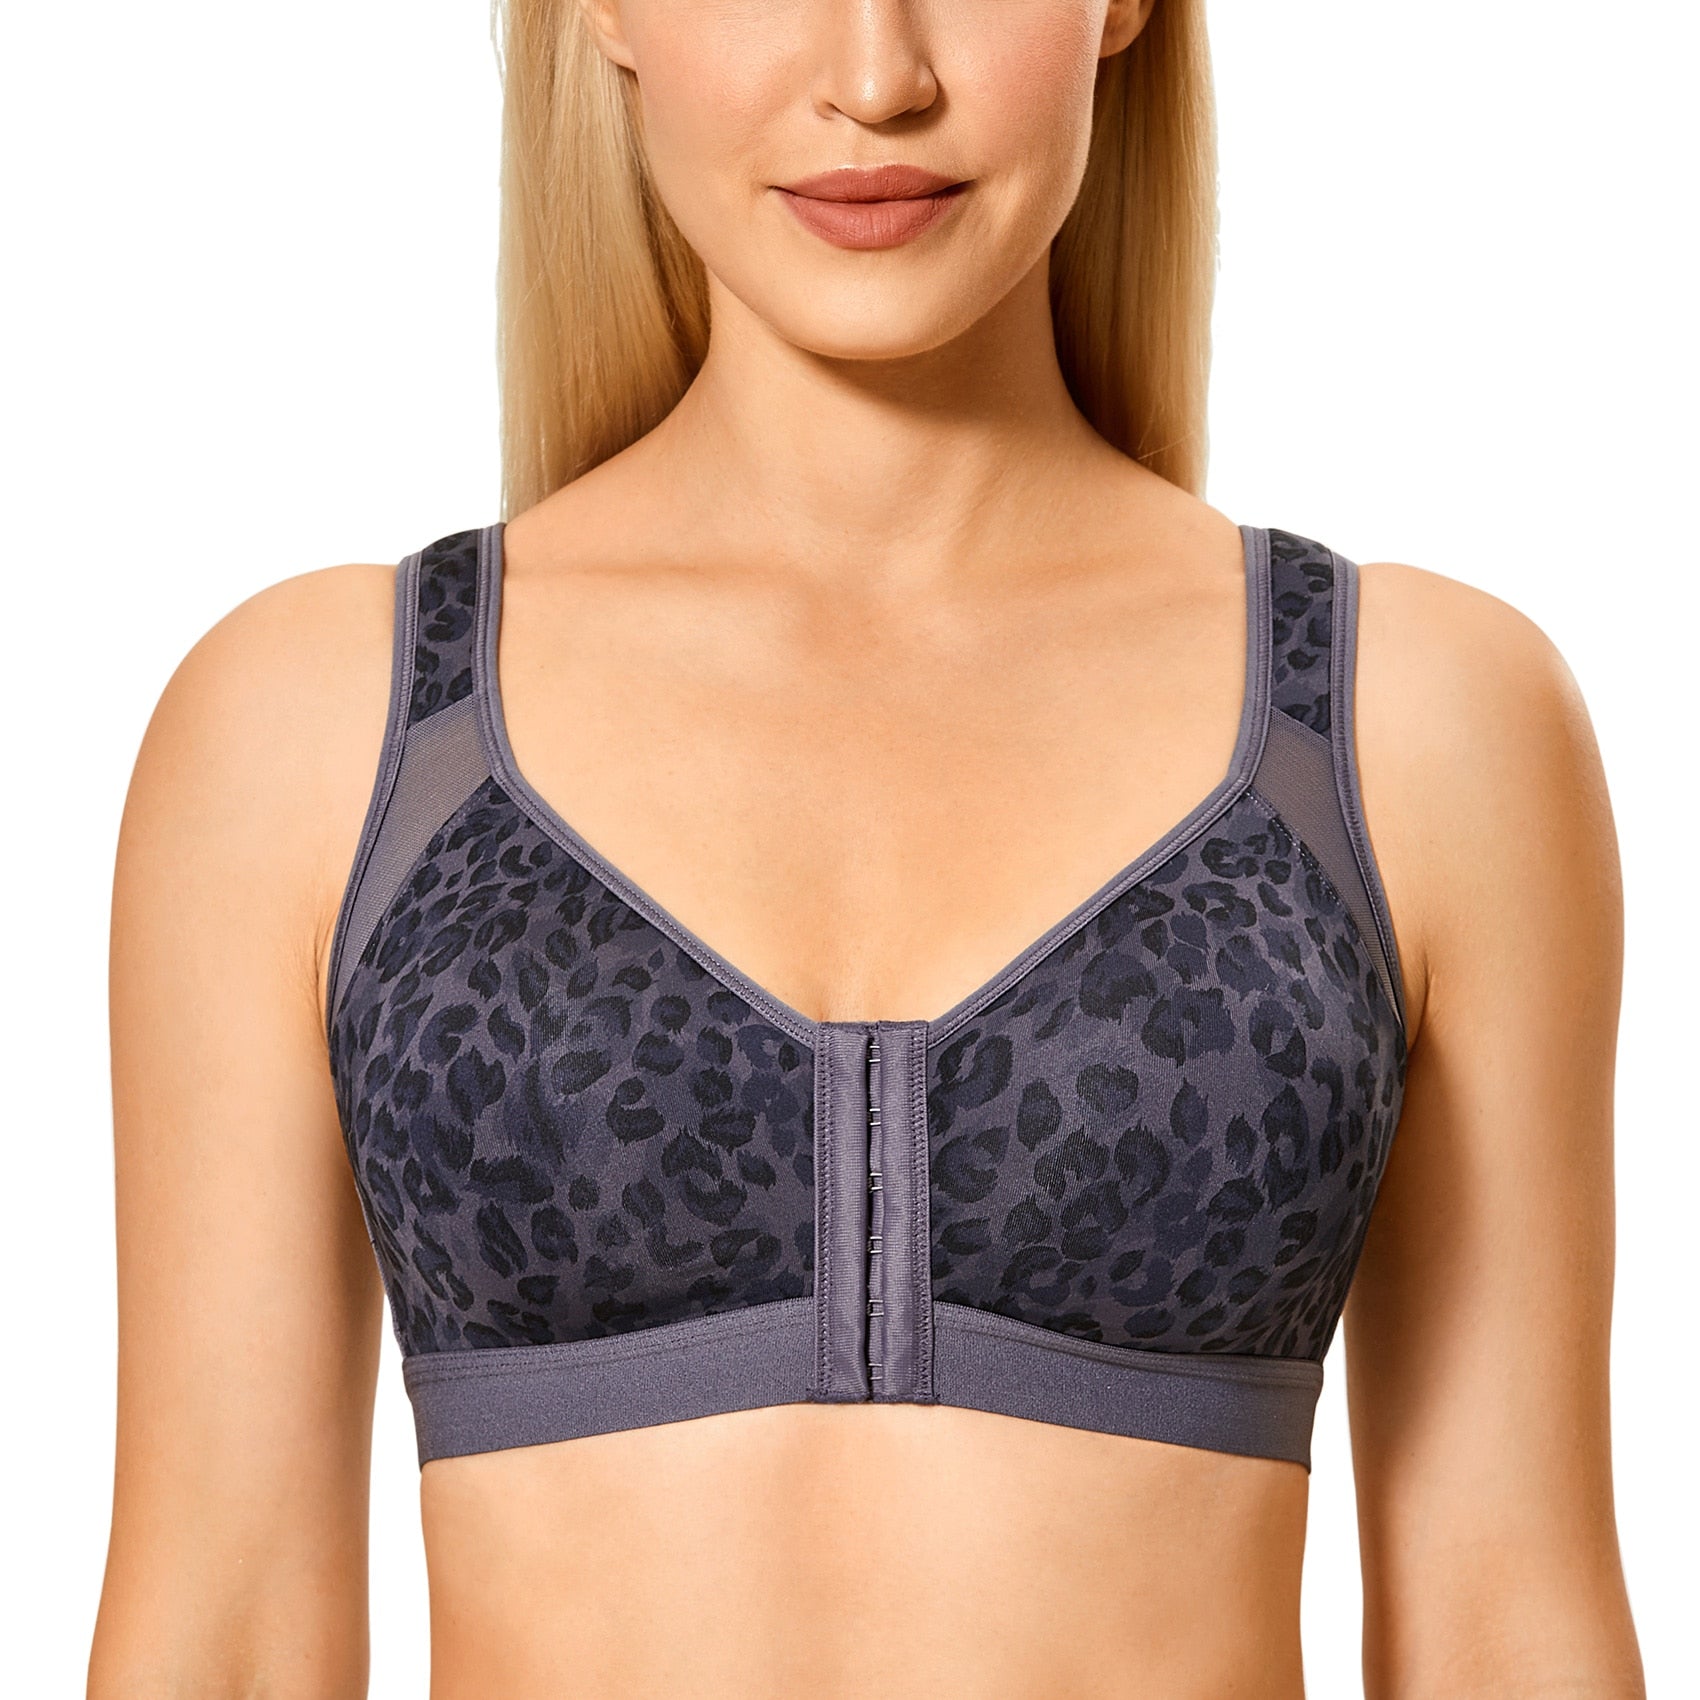 Plus size full cup front closure X back non-padded wireless bra